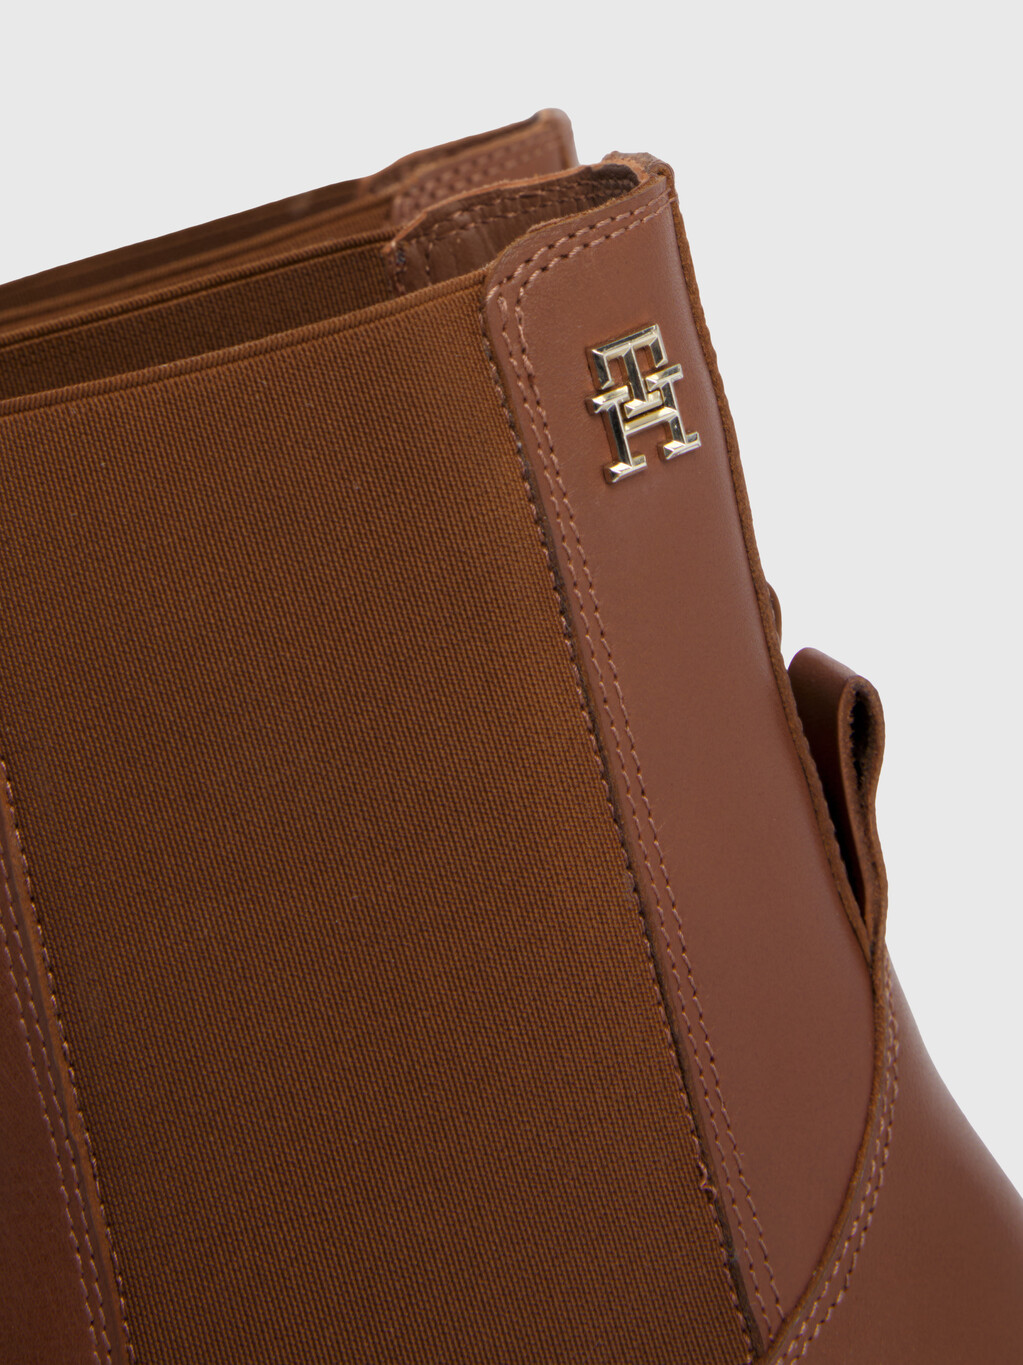 Elevated Essential Leather Ankle Boots, Natural Cognac, hi-res